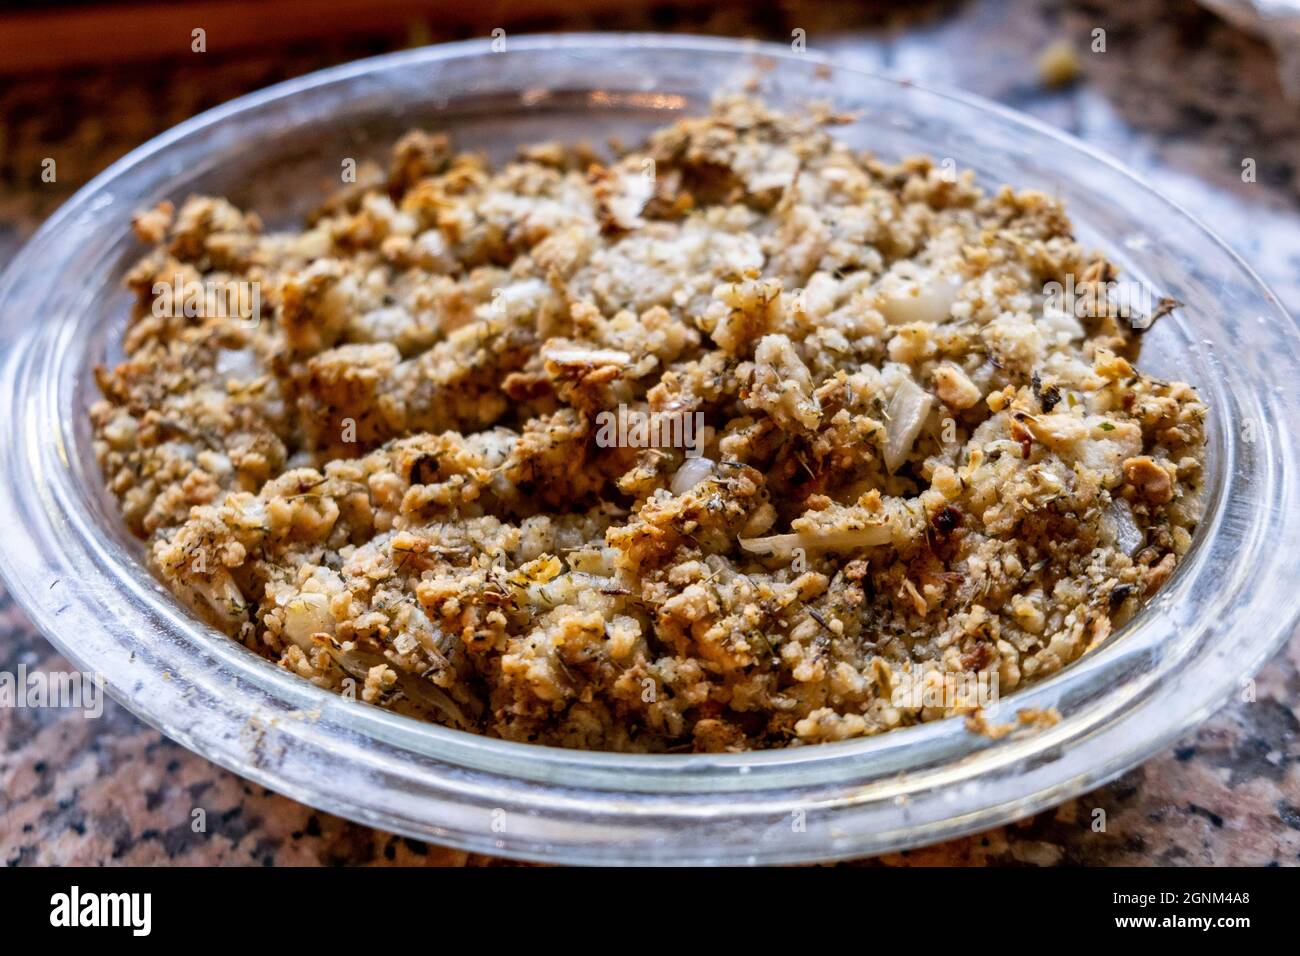 Home Made Glass Oven Dish Of Sage And Onion Stuffing With No People Stock Photo